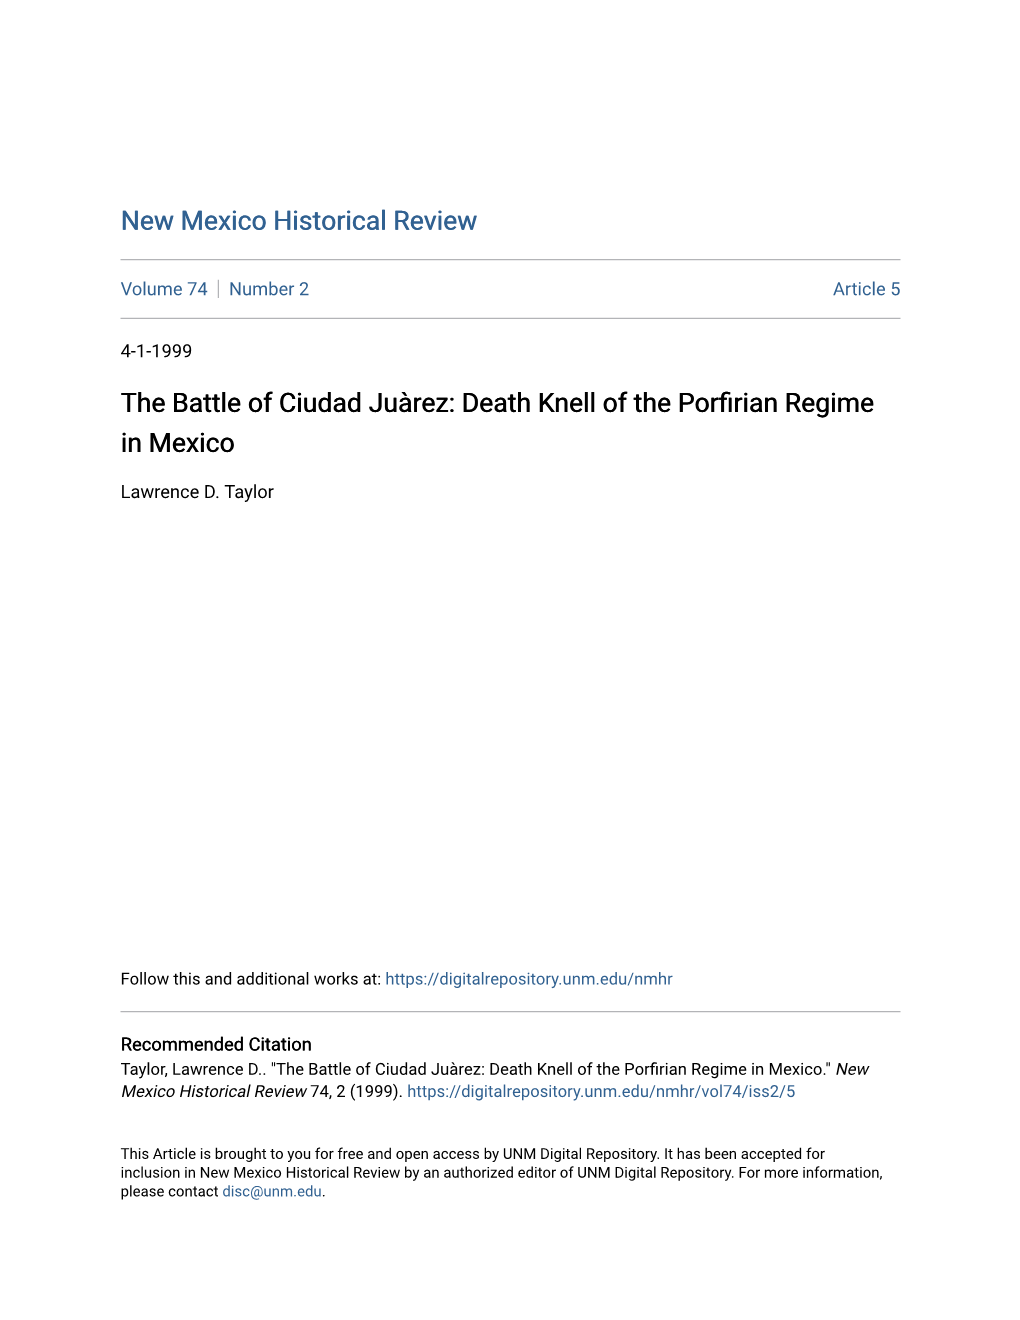 Death Knell of the Porfirian Regime in Mexico